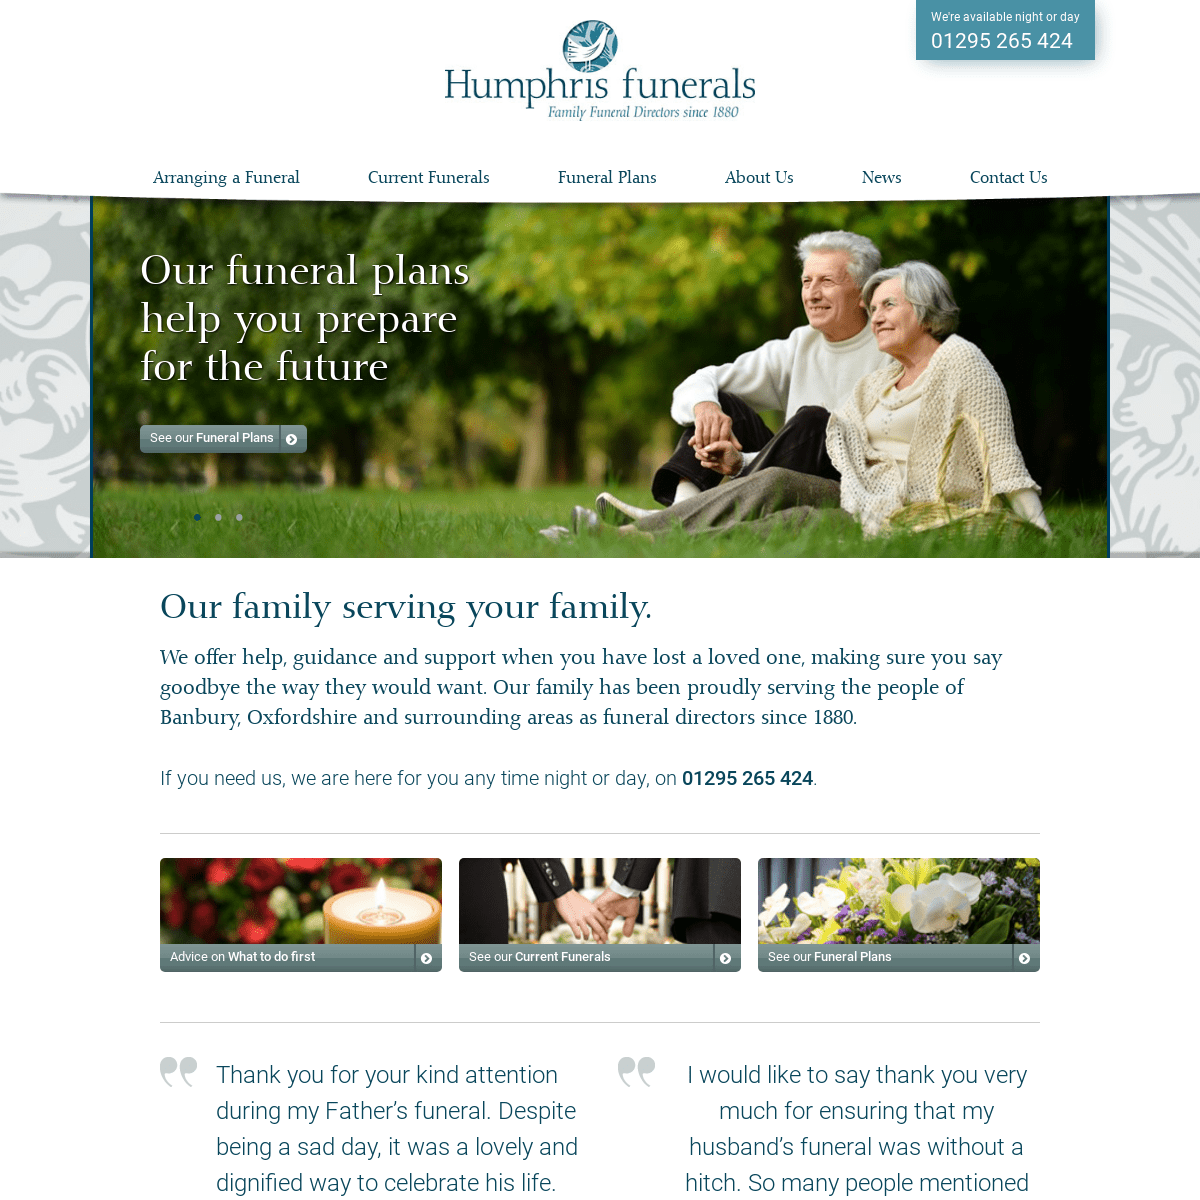 A complete backup of humphrisfunerals.co.uk